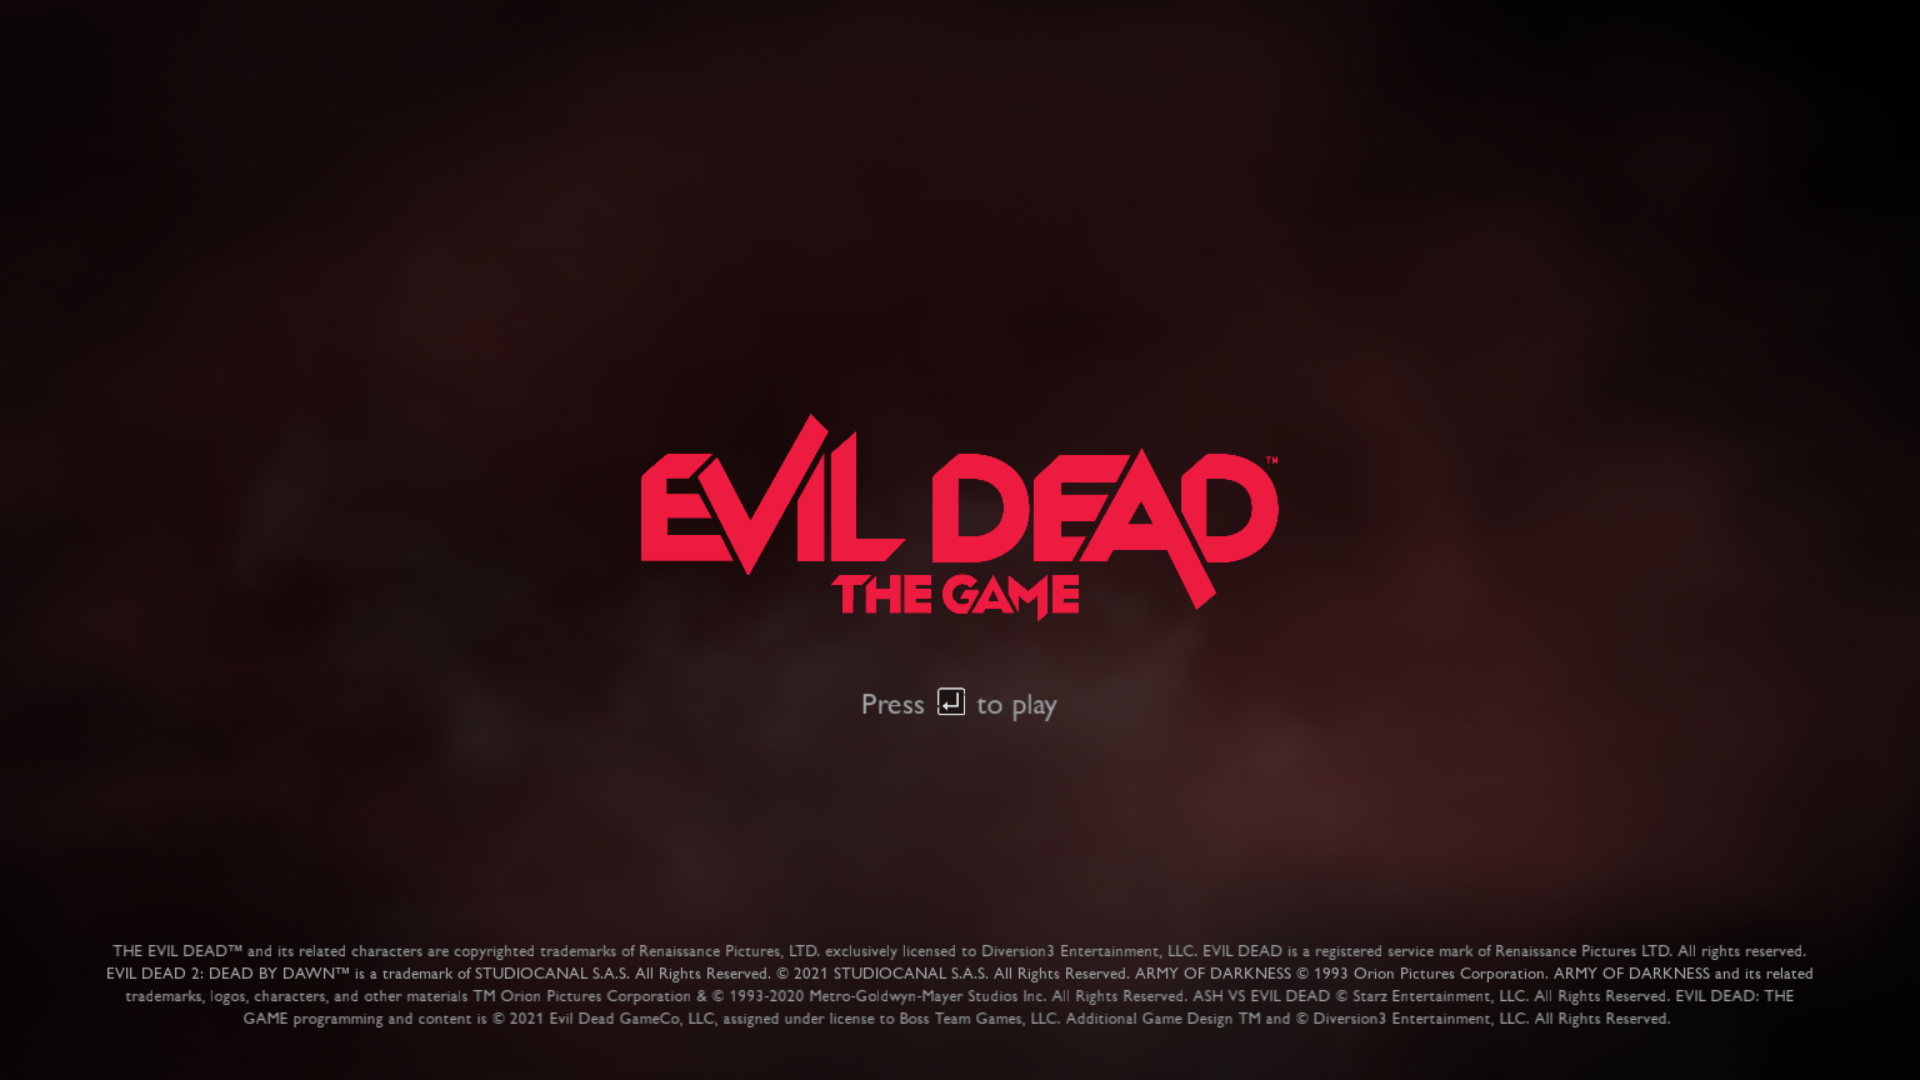 Evil Dead: The Game: Interview With A Passionate Team - DREAD XP